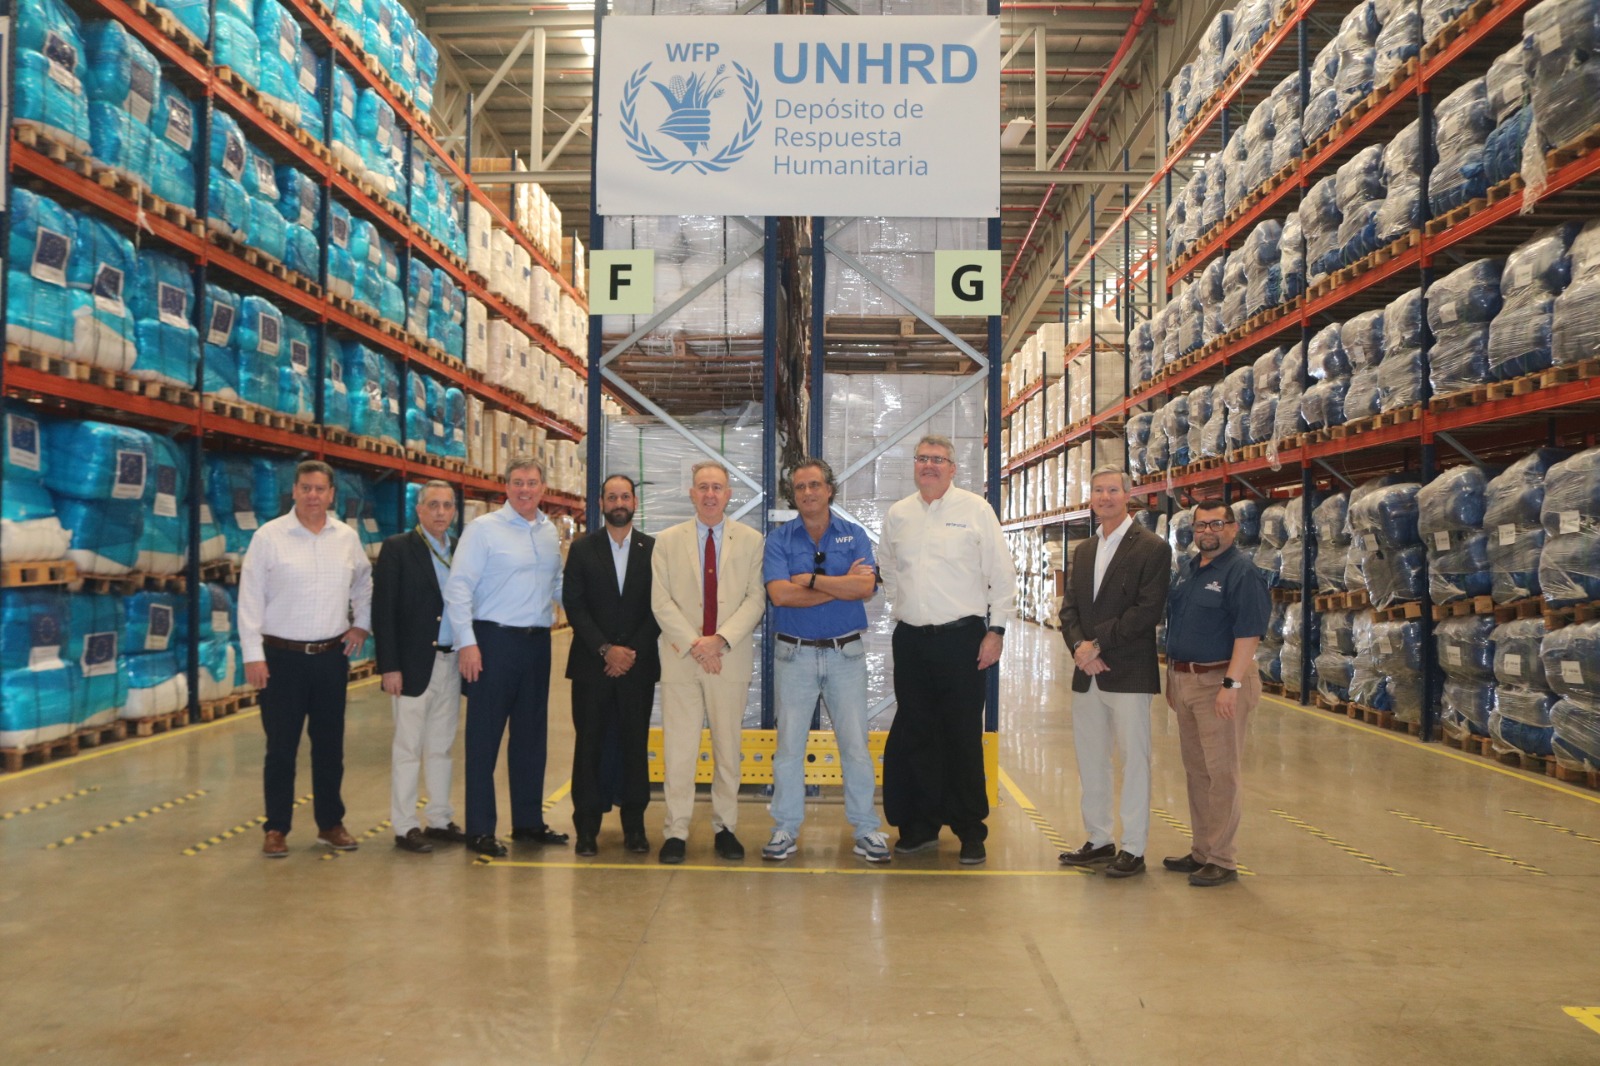 Visit to the Regional Logistical Center for Humanitarian Assistance in Panama Pacifico